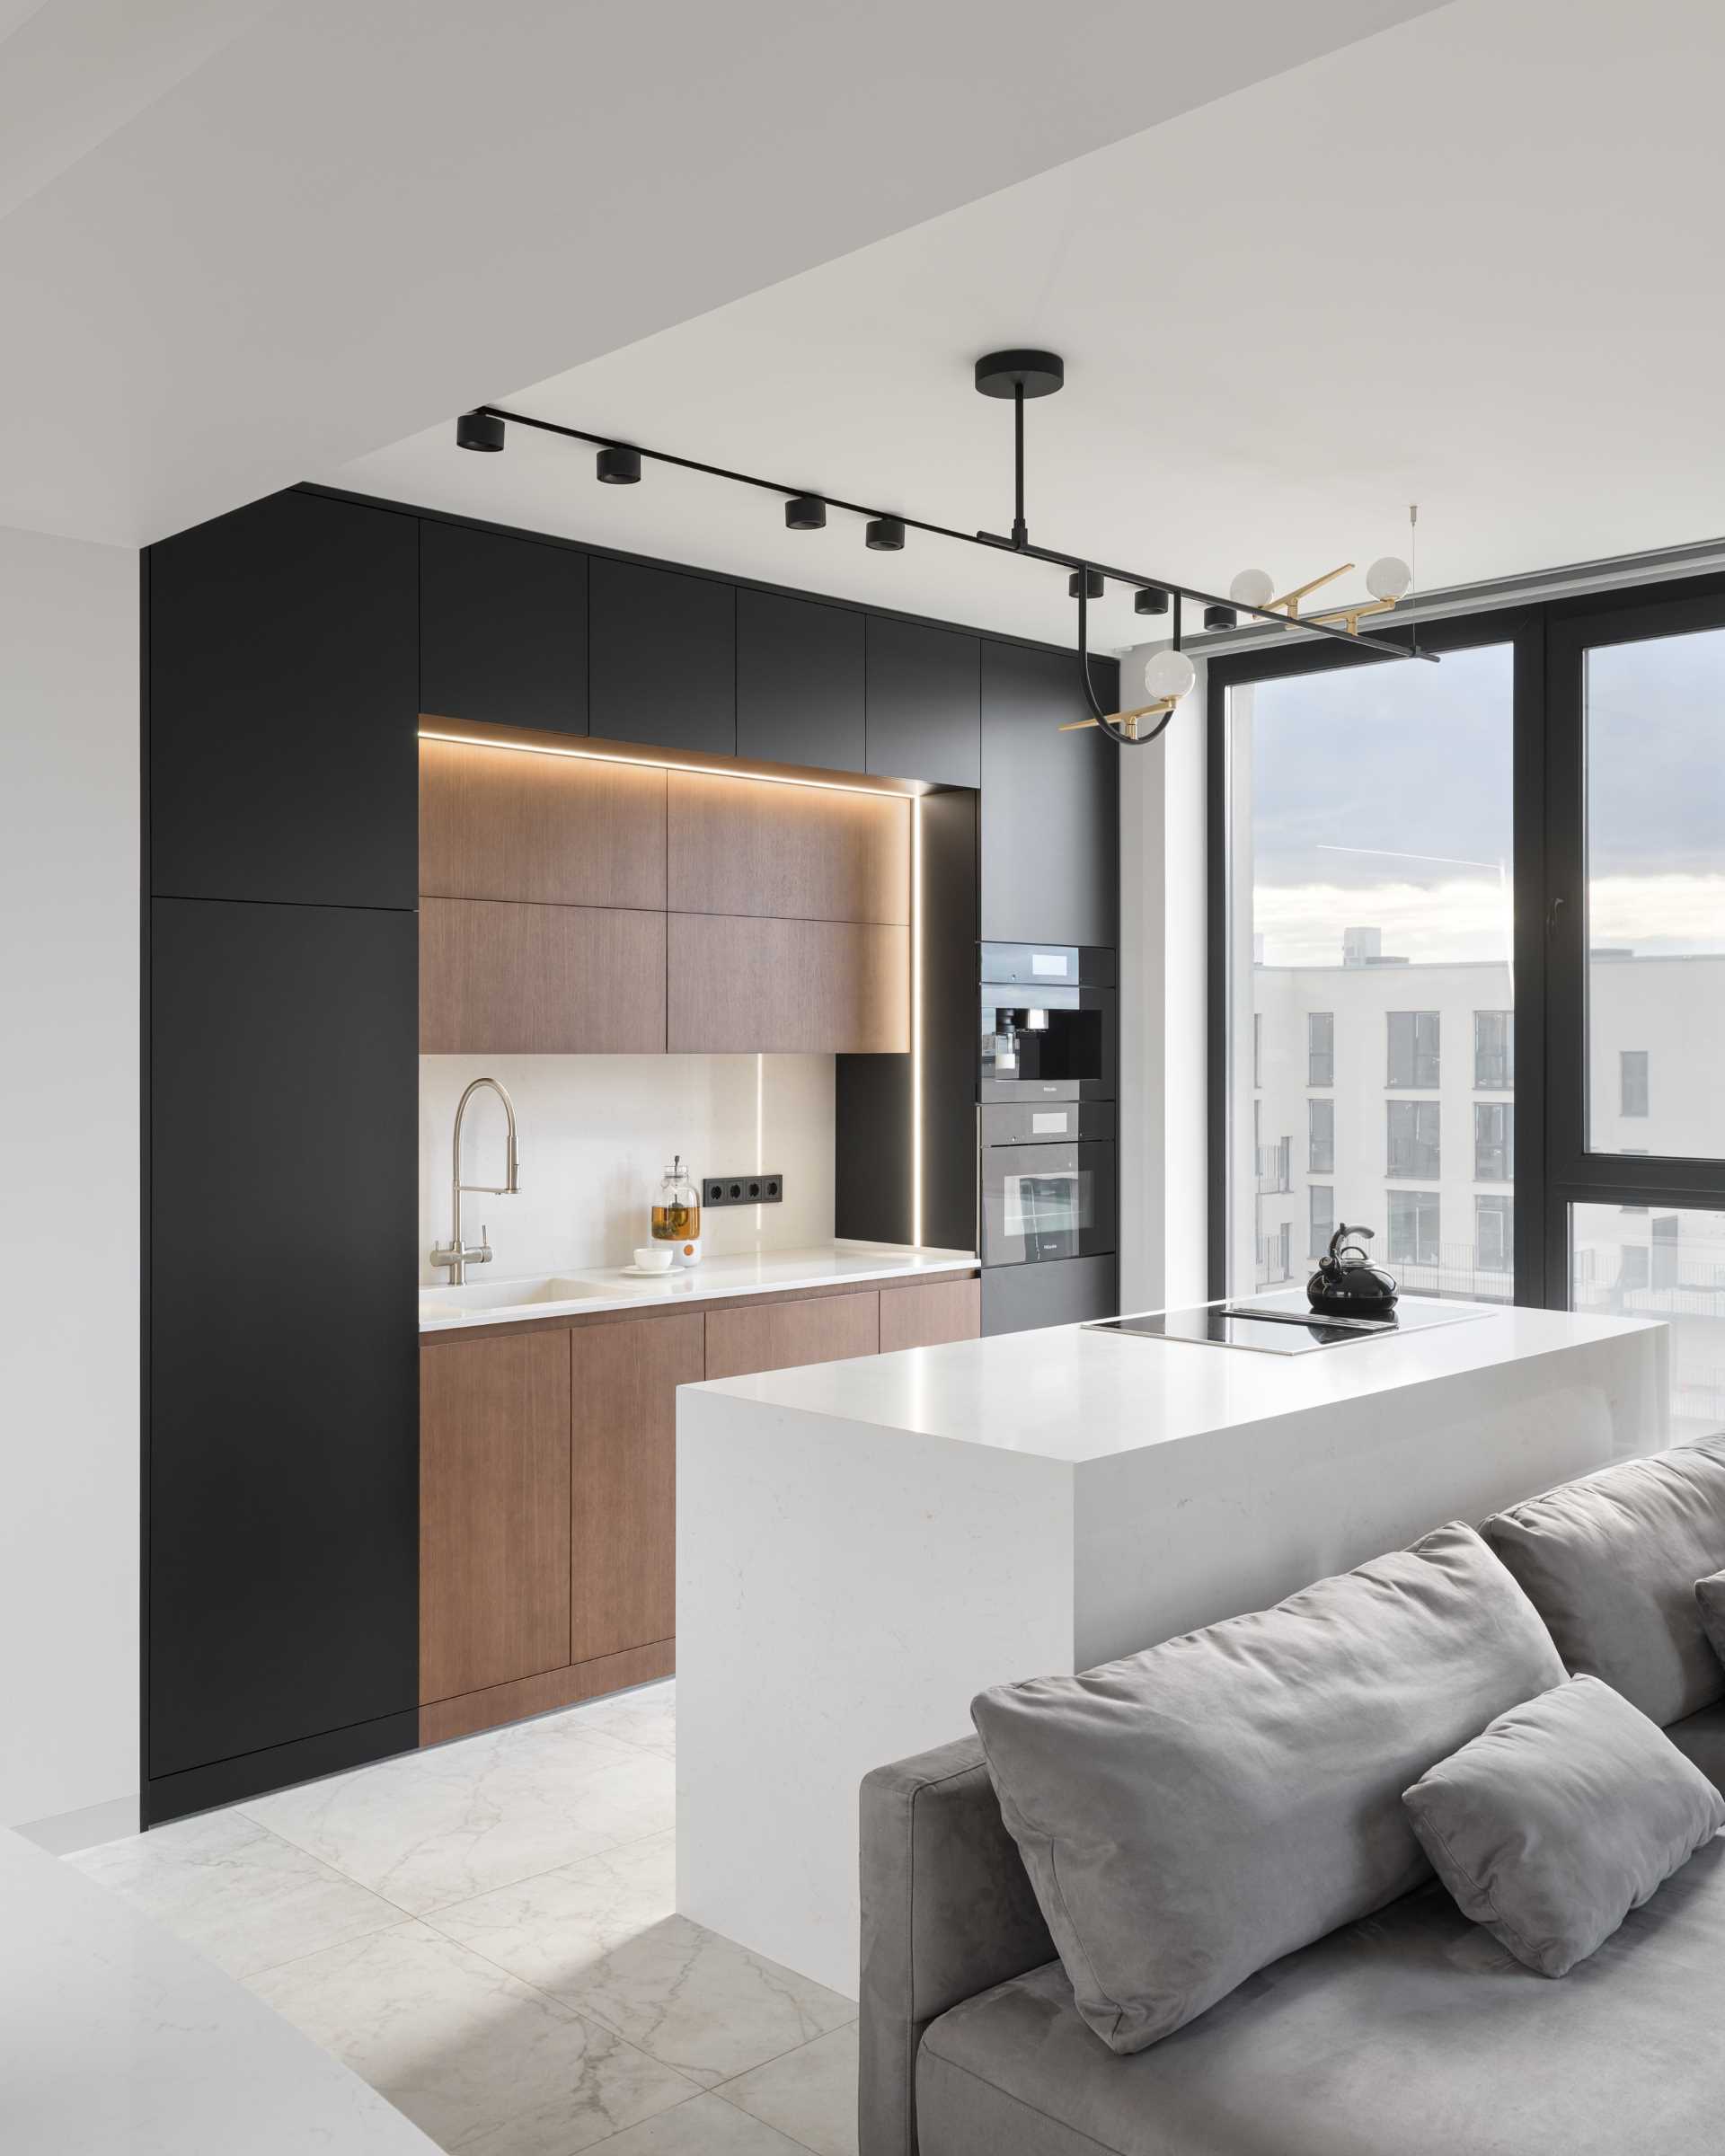 A modern kitchen with black, wood, and white cabinets, and hidden lighting.